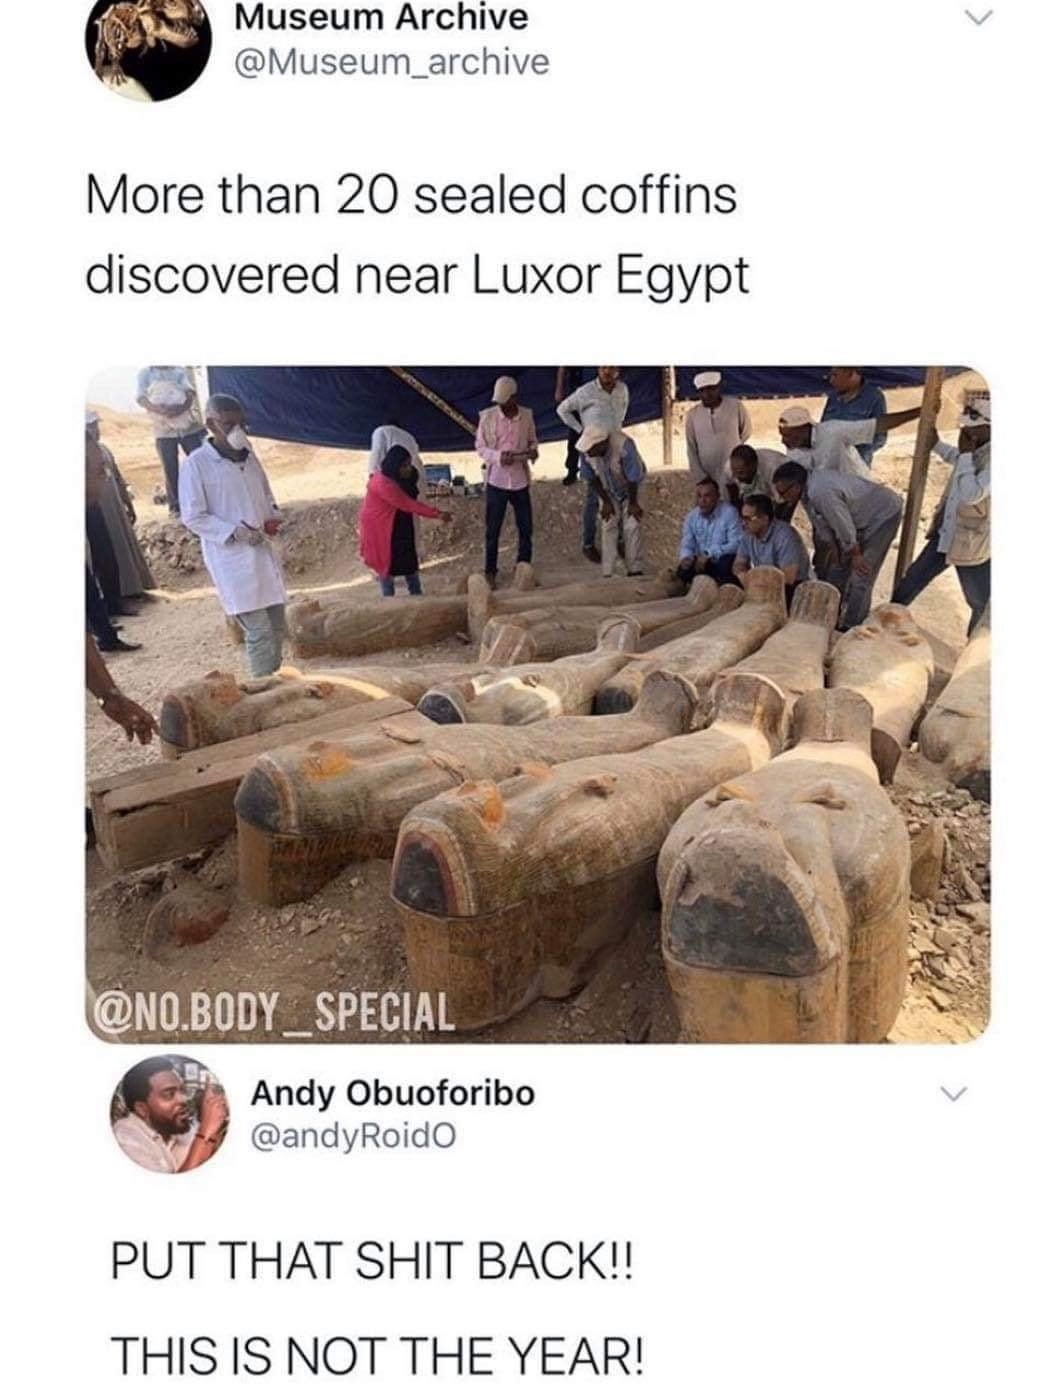 more than 20 sealed coffins discovered near luxor egypt - Museum Archive More than 20 sealed coffins discovered near Luxor Egypt .BODY_SPECIAL Andy Obuoforibo Put That Shit Back!! This Is Not The Year!